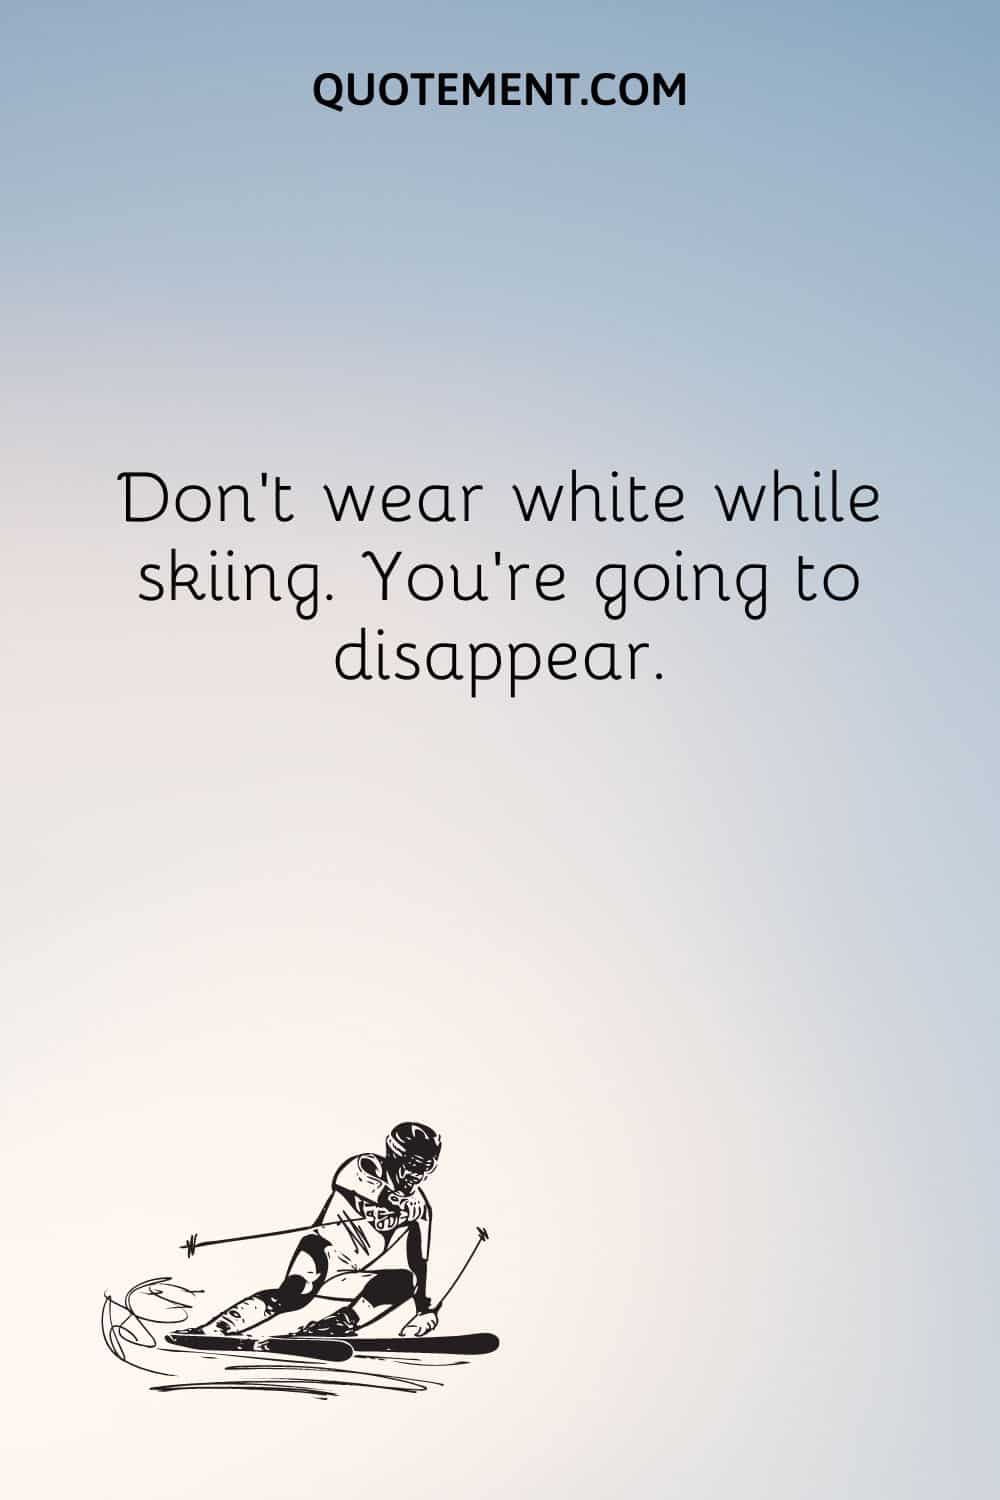 Don’t wear white while skiing. You’re going to disappear.